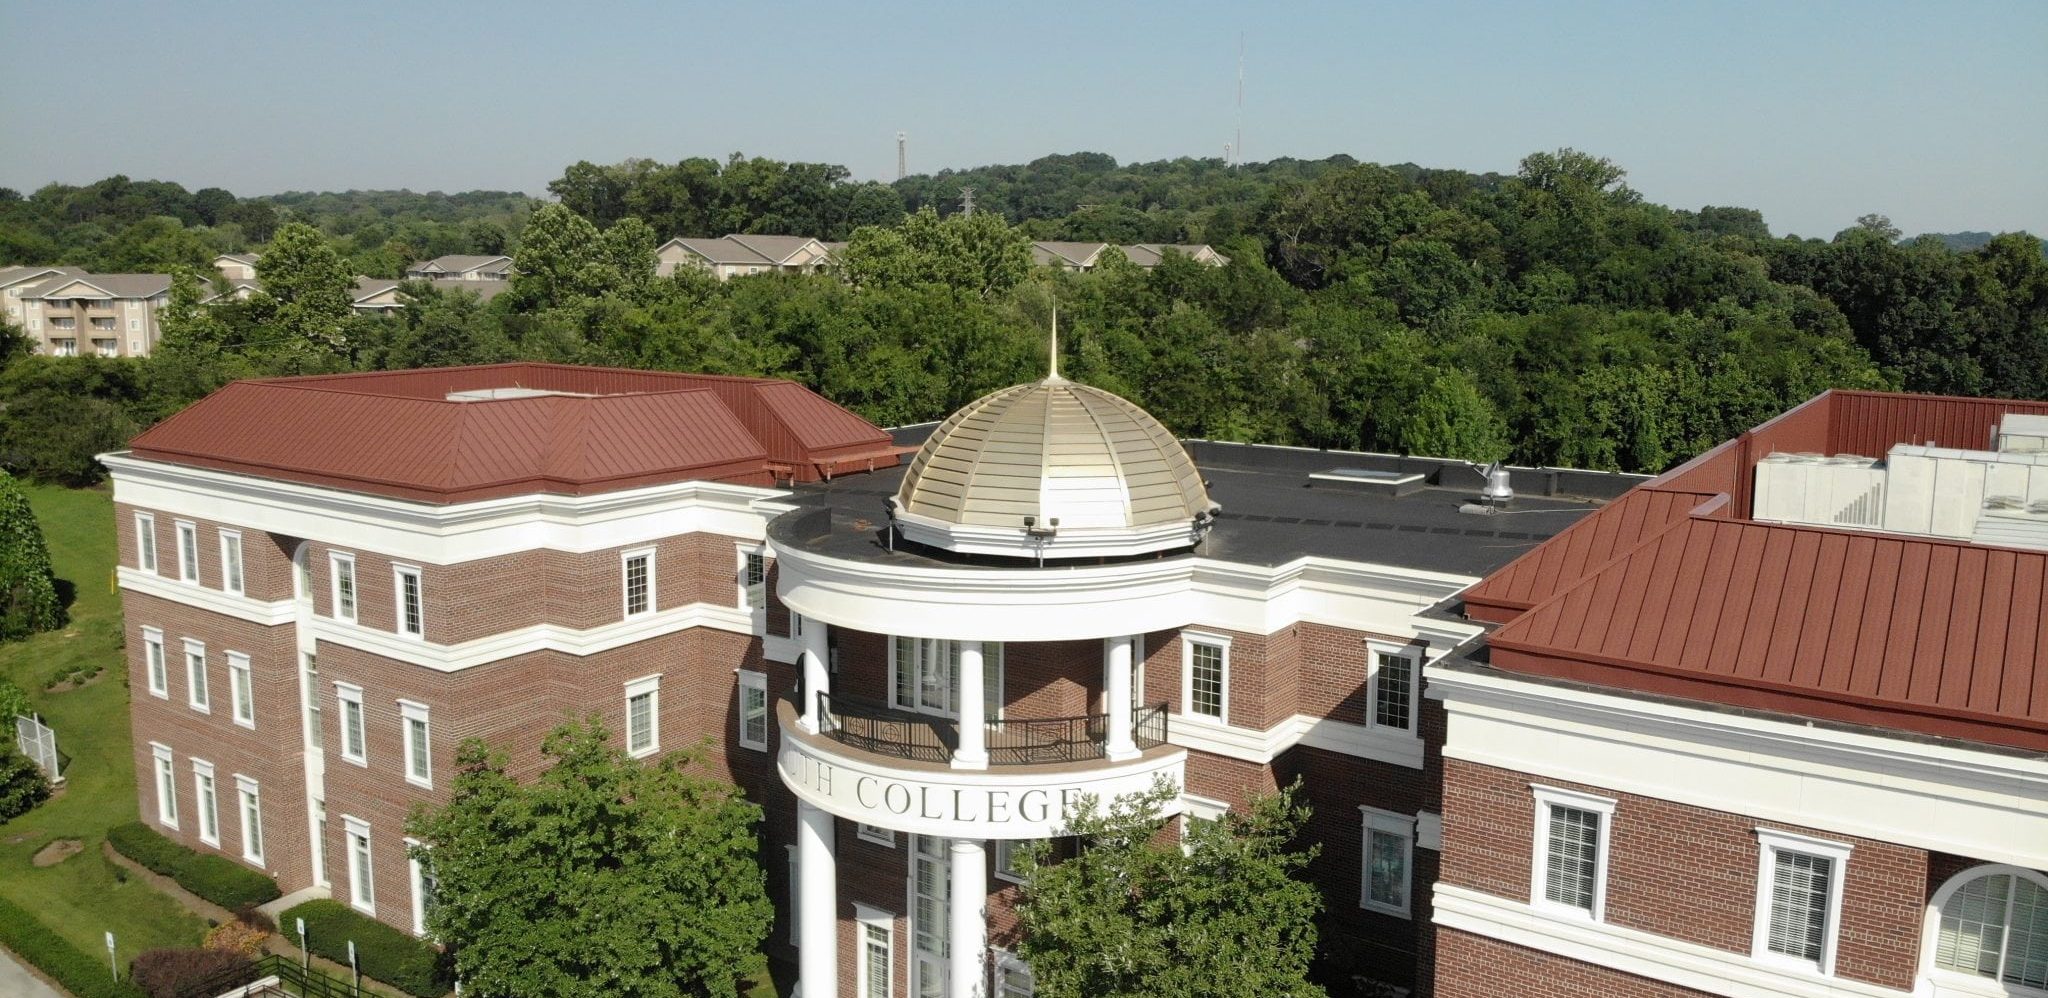 South College cupola image